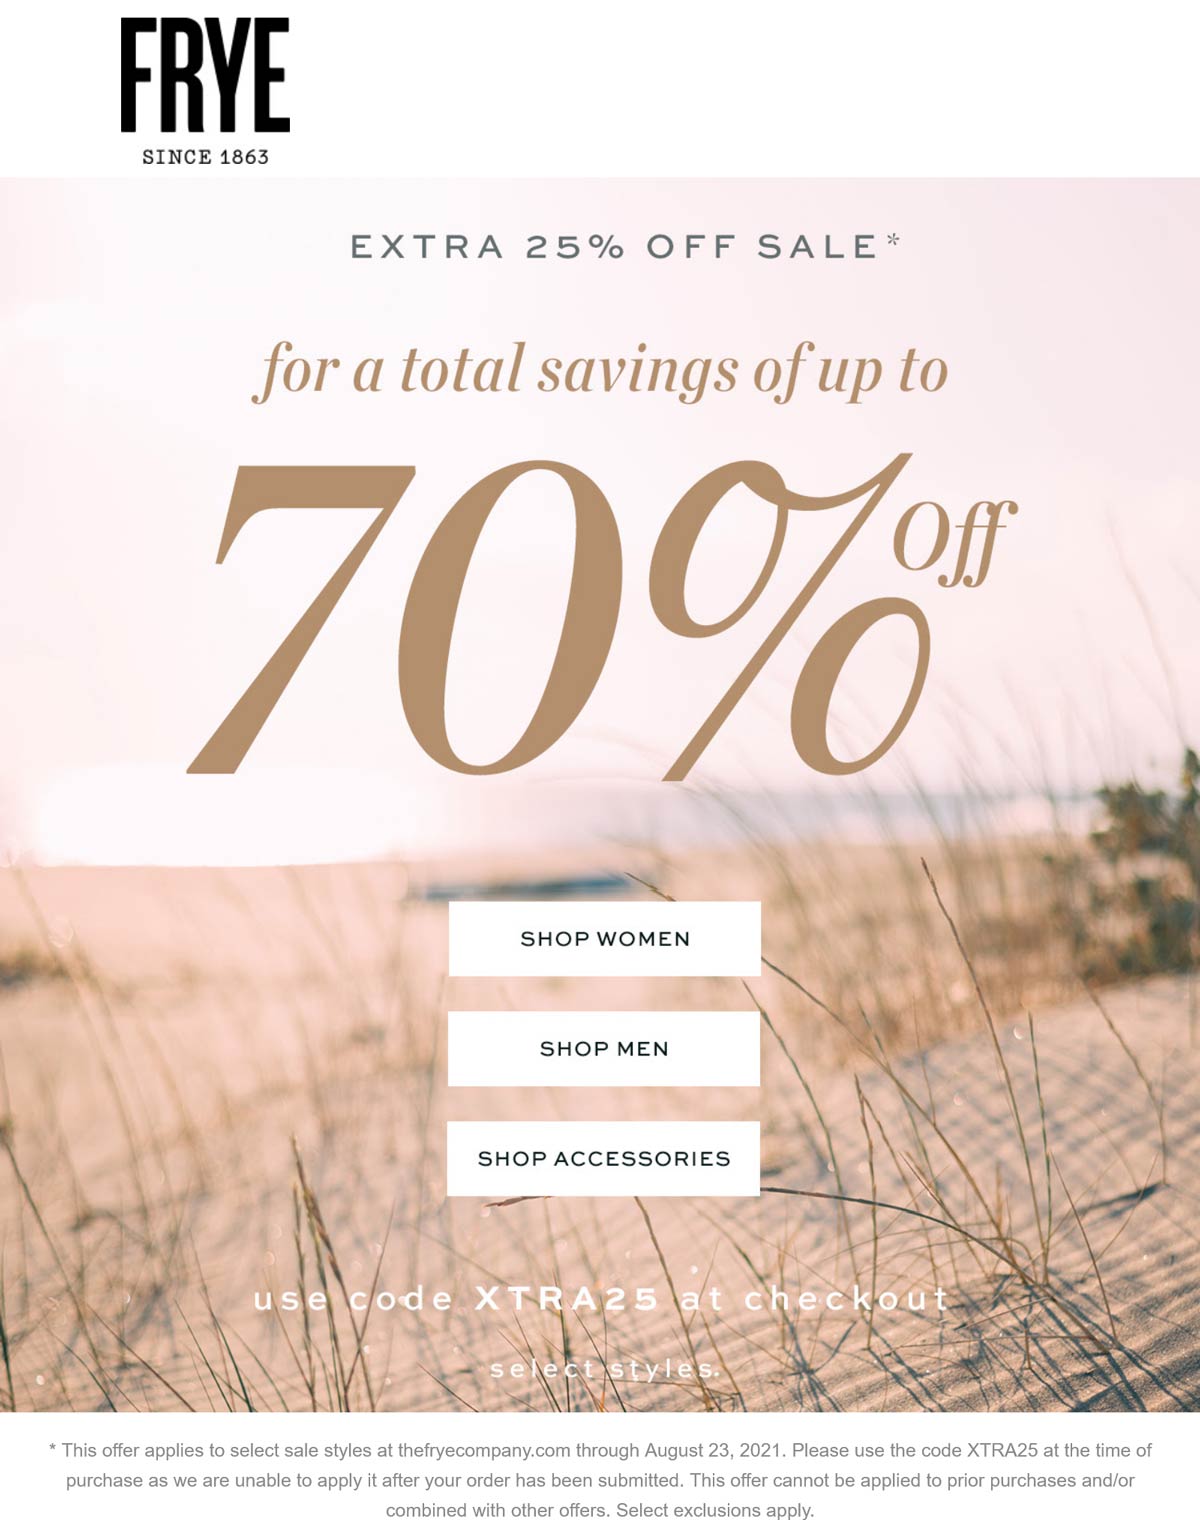 Frye stores Coupon  Extra 25% off at The Frye Company via promo code XTRA25 #frye 